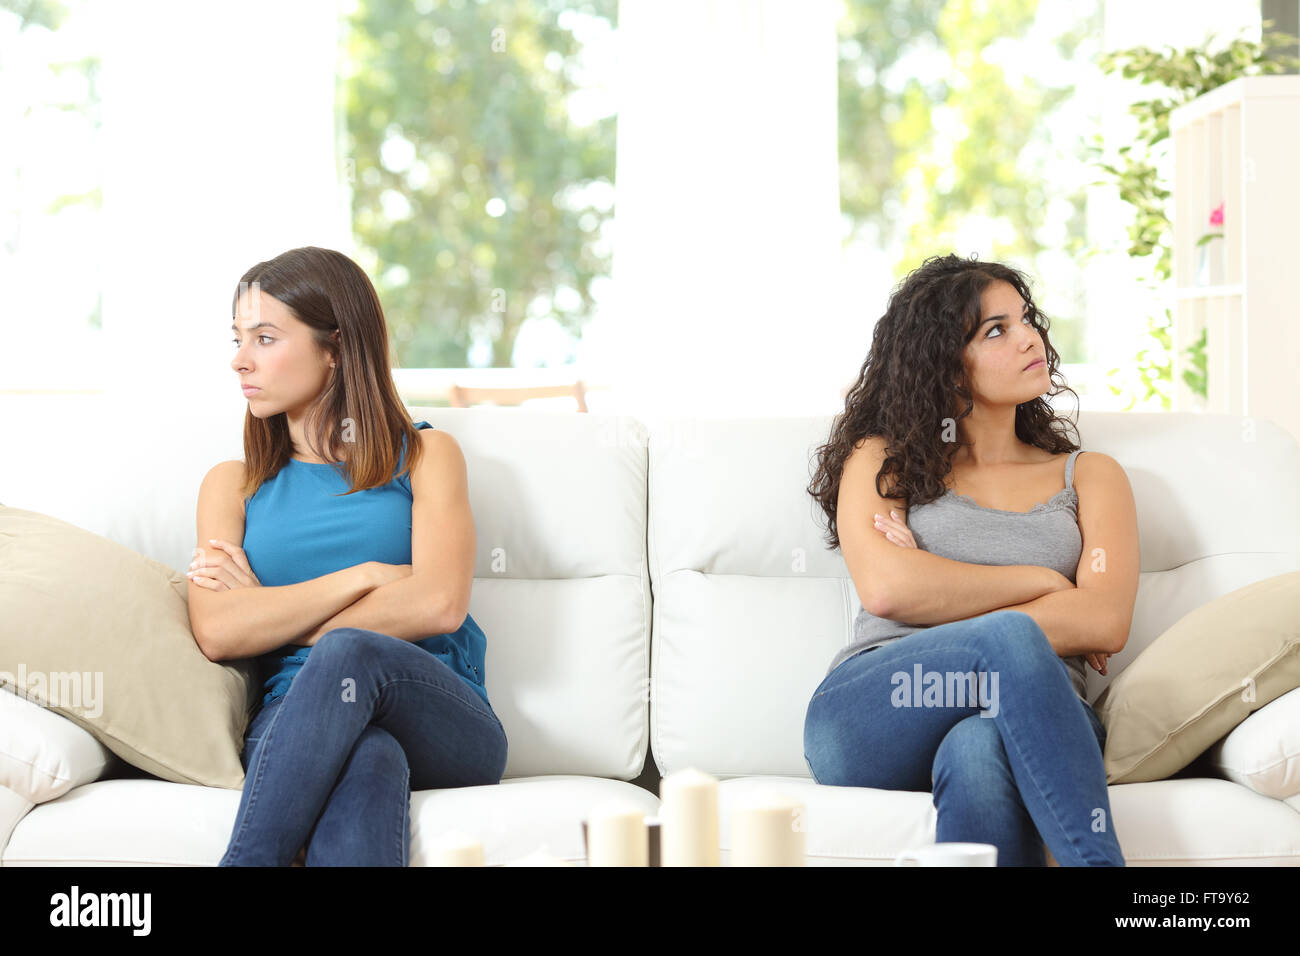 Two angry friends after a quarrel sitting on a couch and looking at the other side Stock Photo